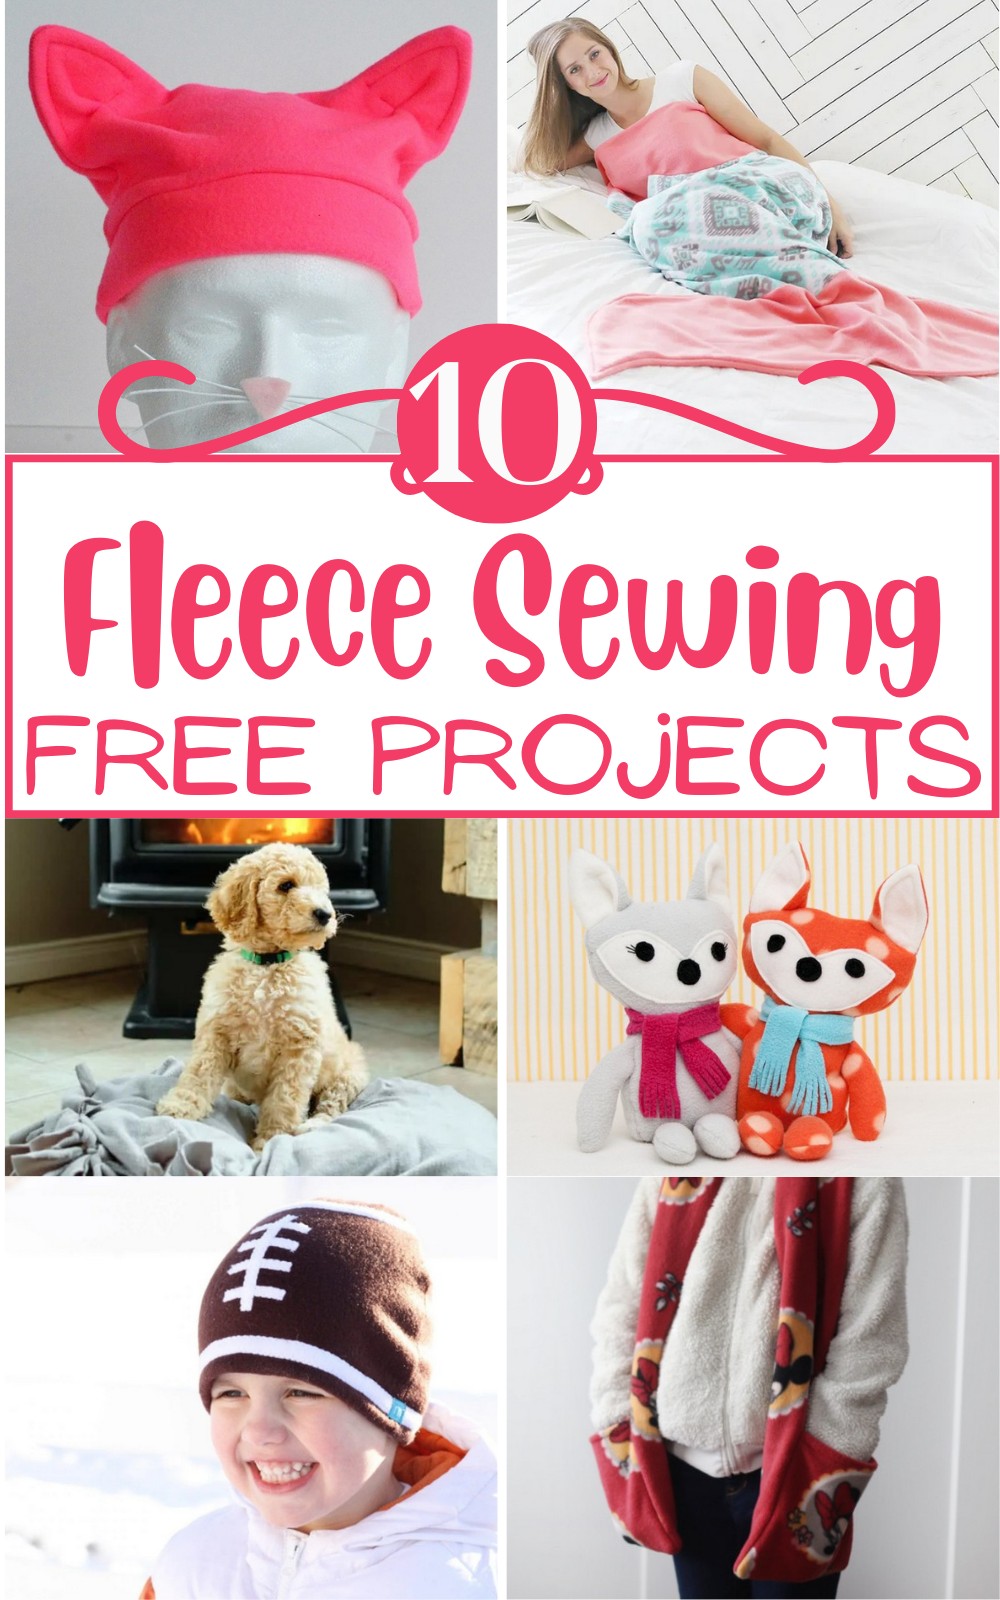 Free Fleece Sewing Projects 1